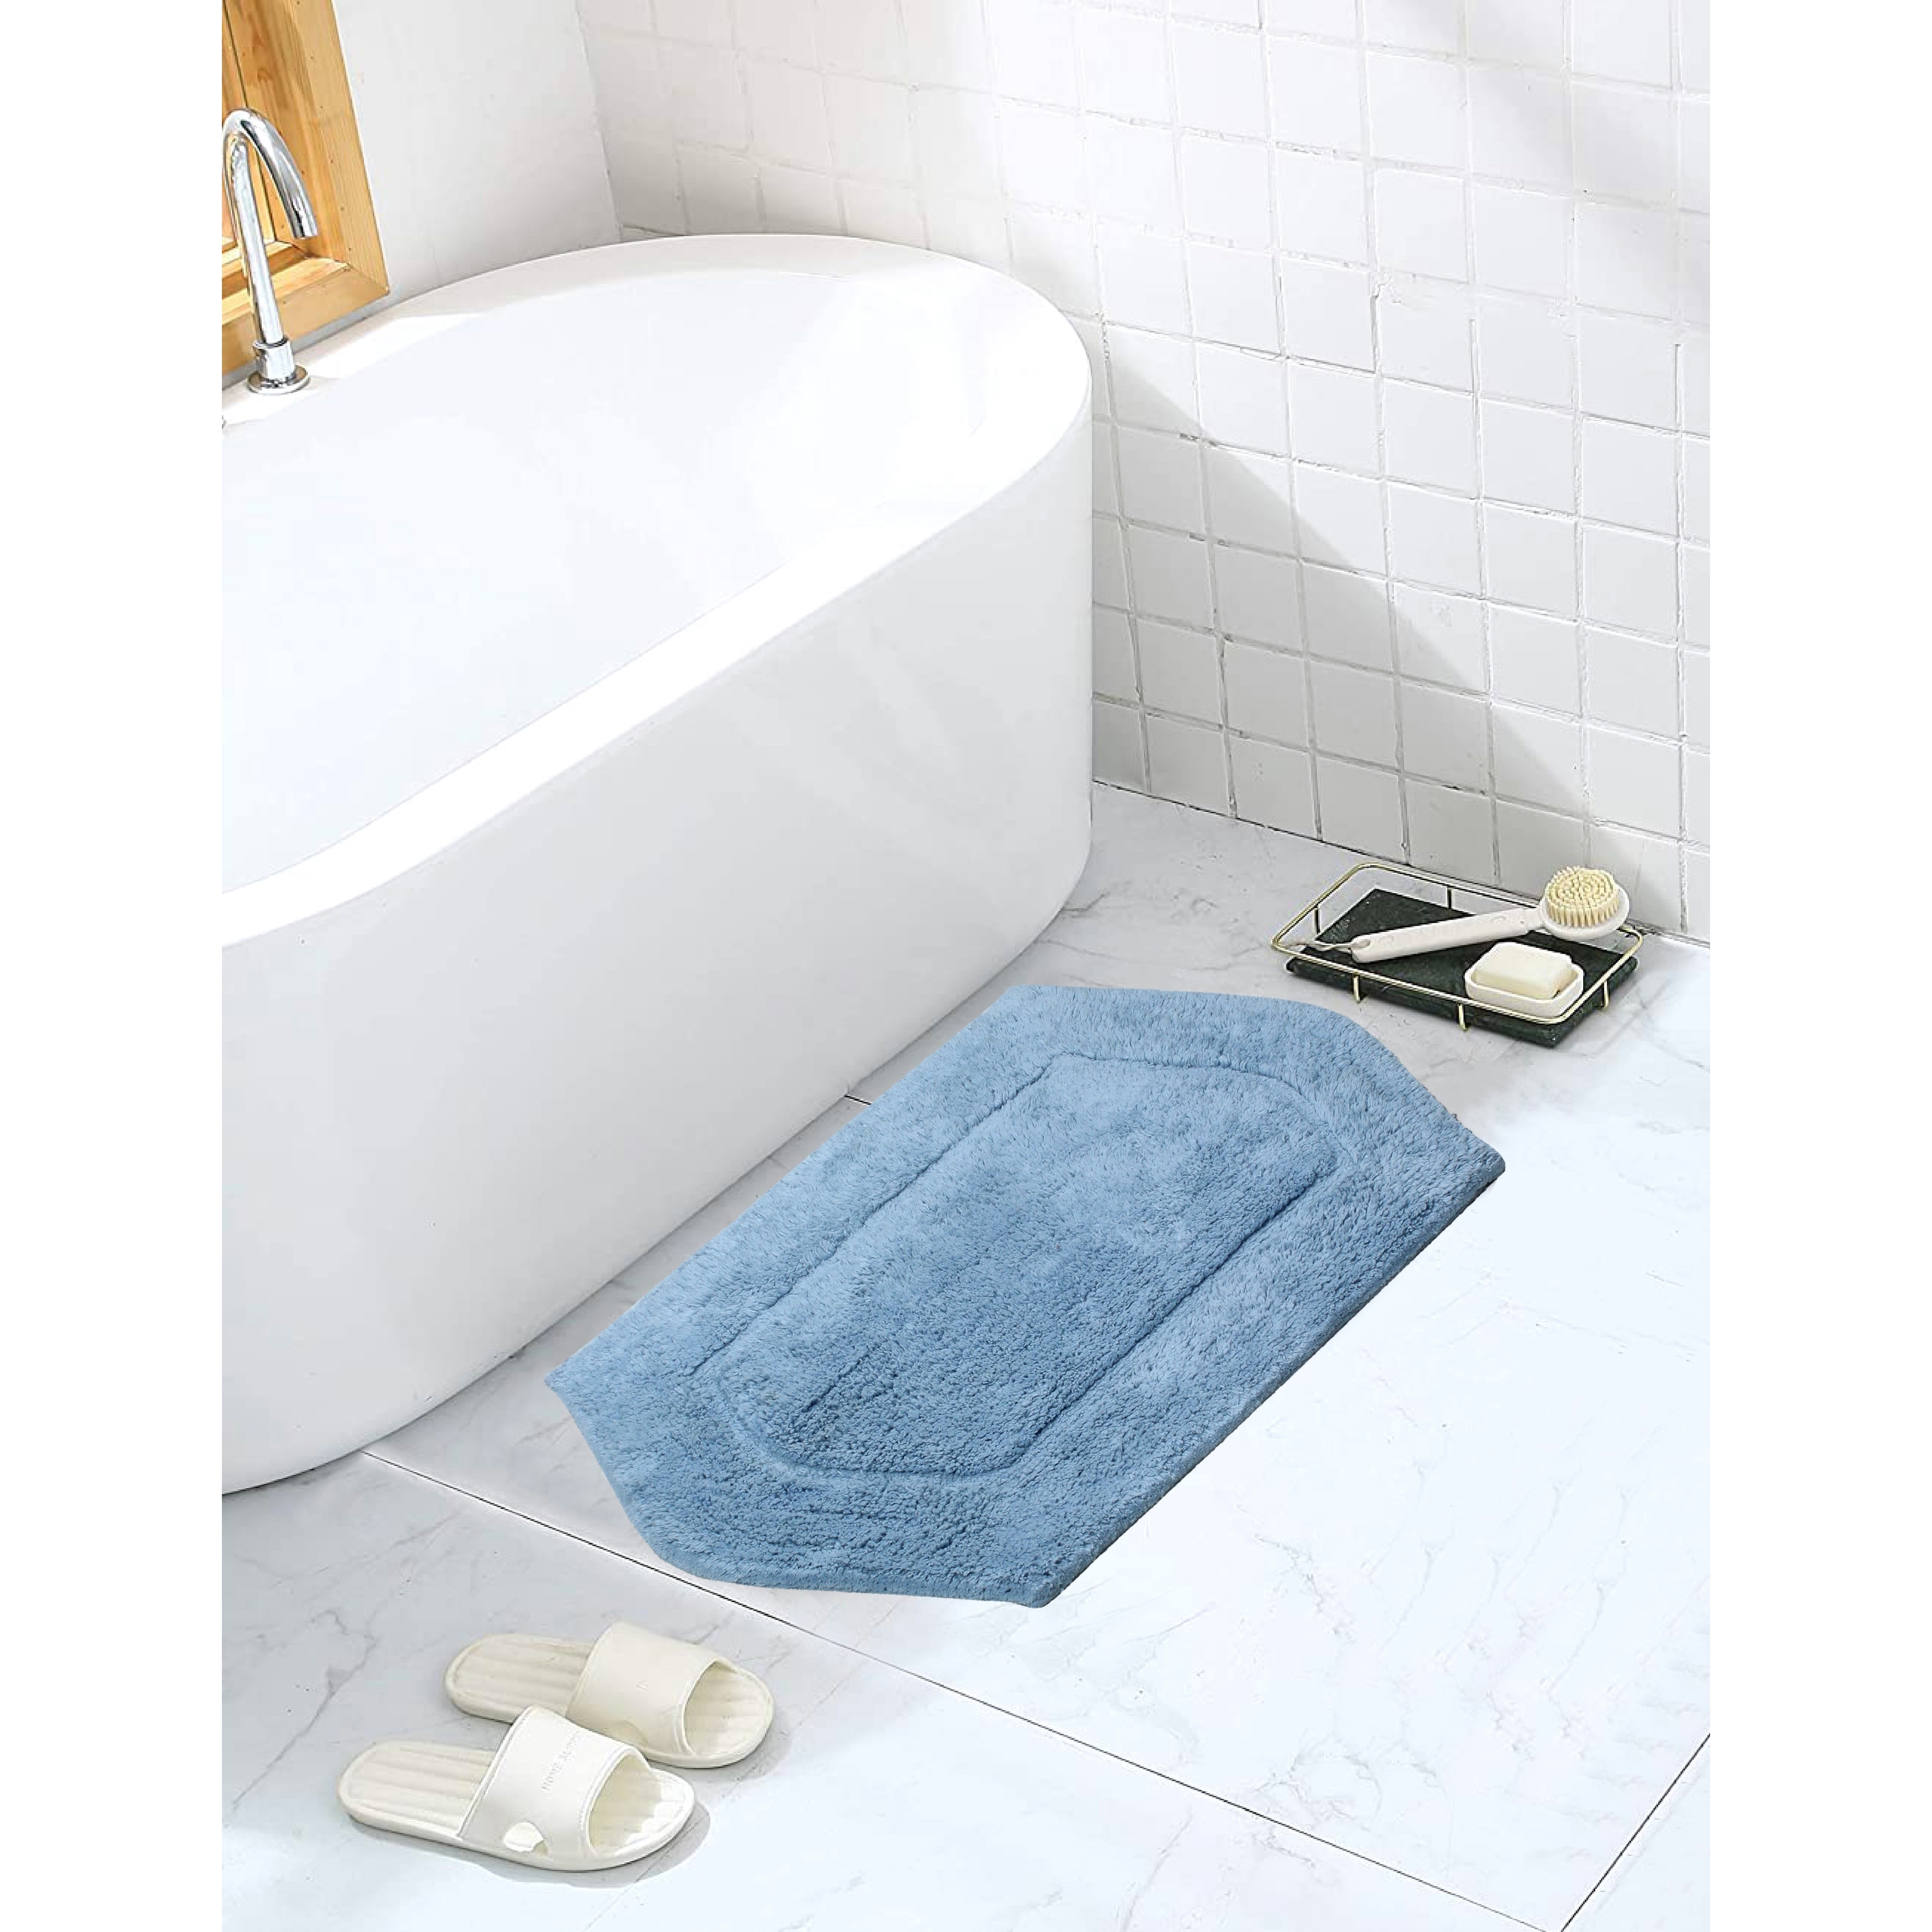 Ample Decor Cotton Bath Mats 6 Pack 24 x 17 inches 1350 GSM - for Bathroom  Floor, Shower - Grey